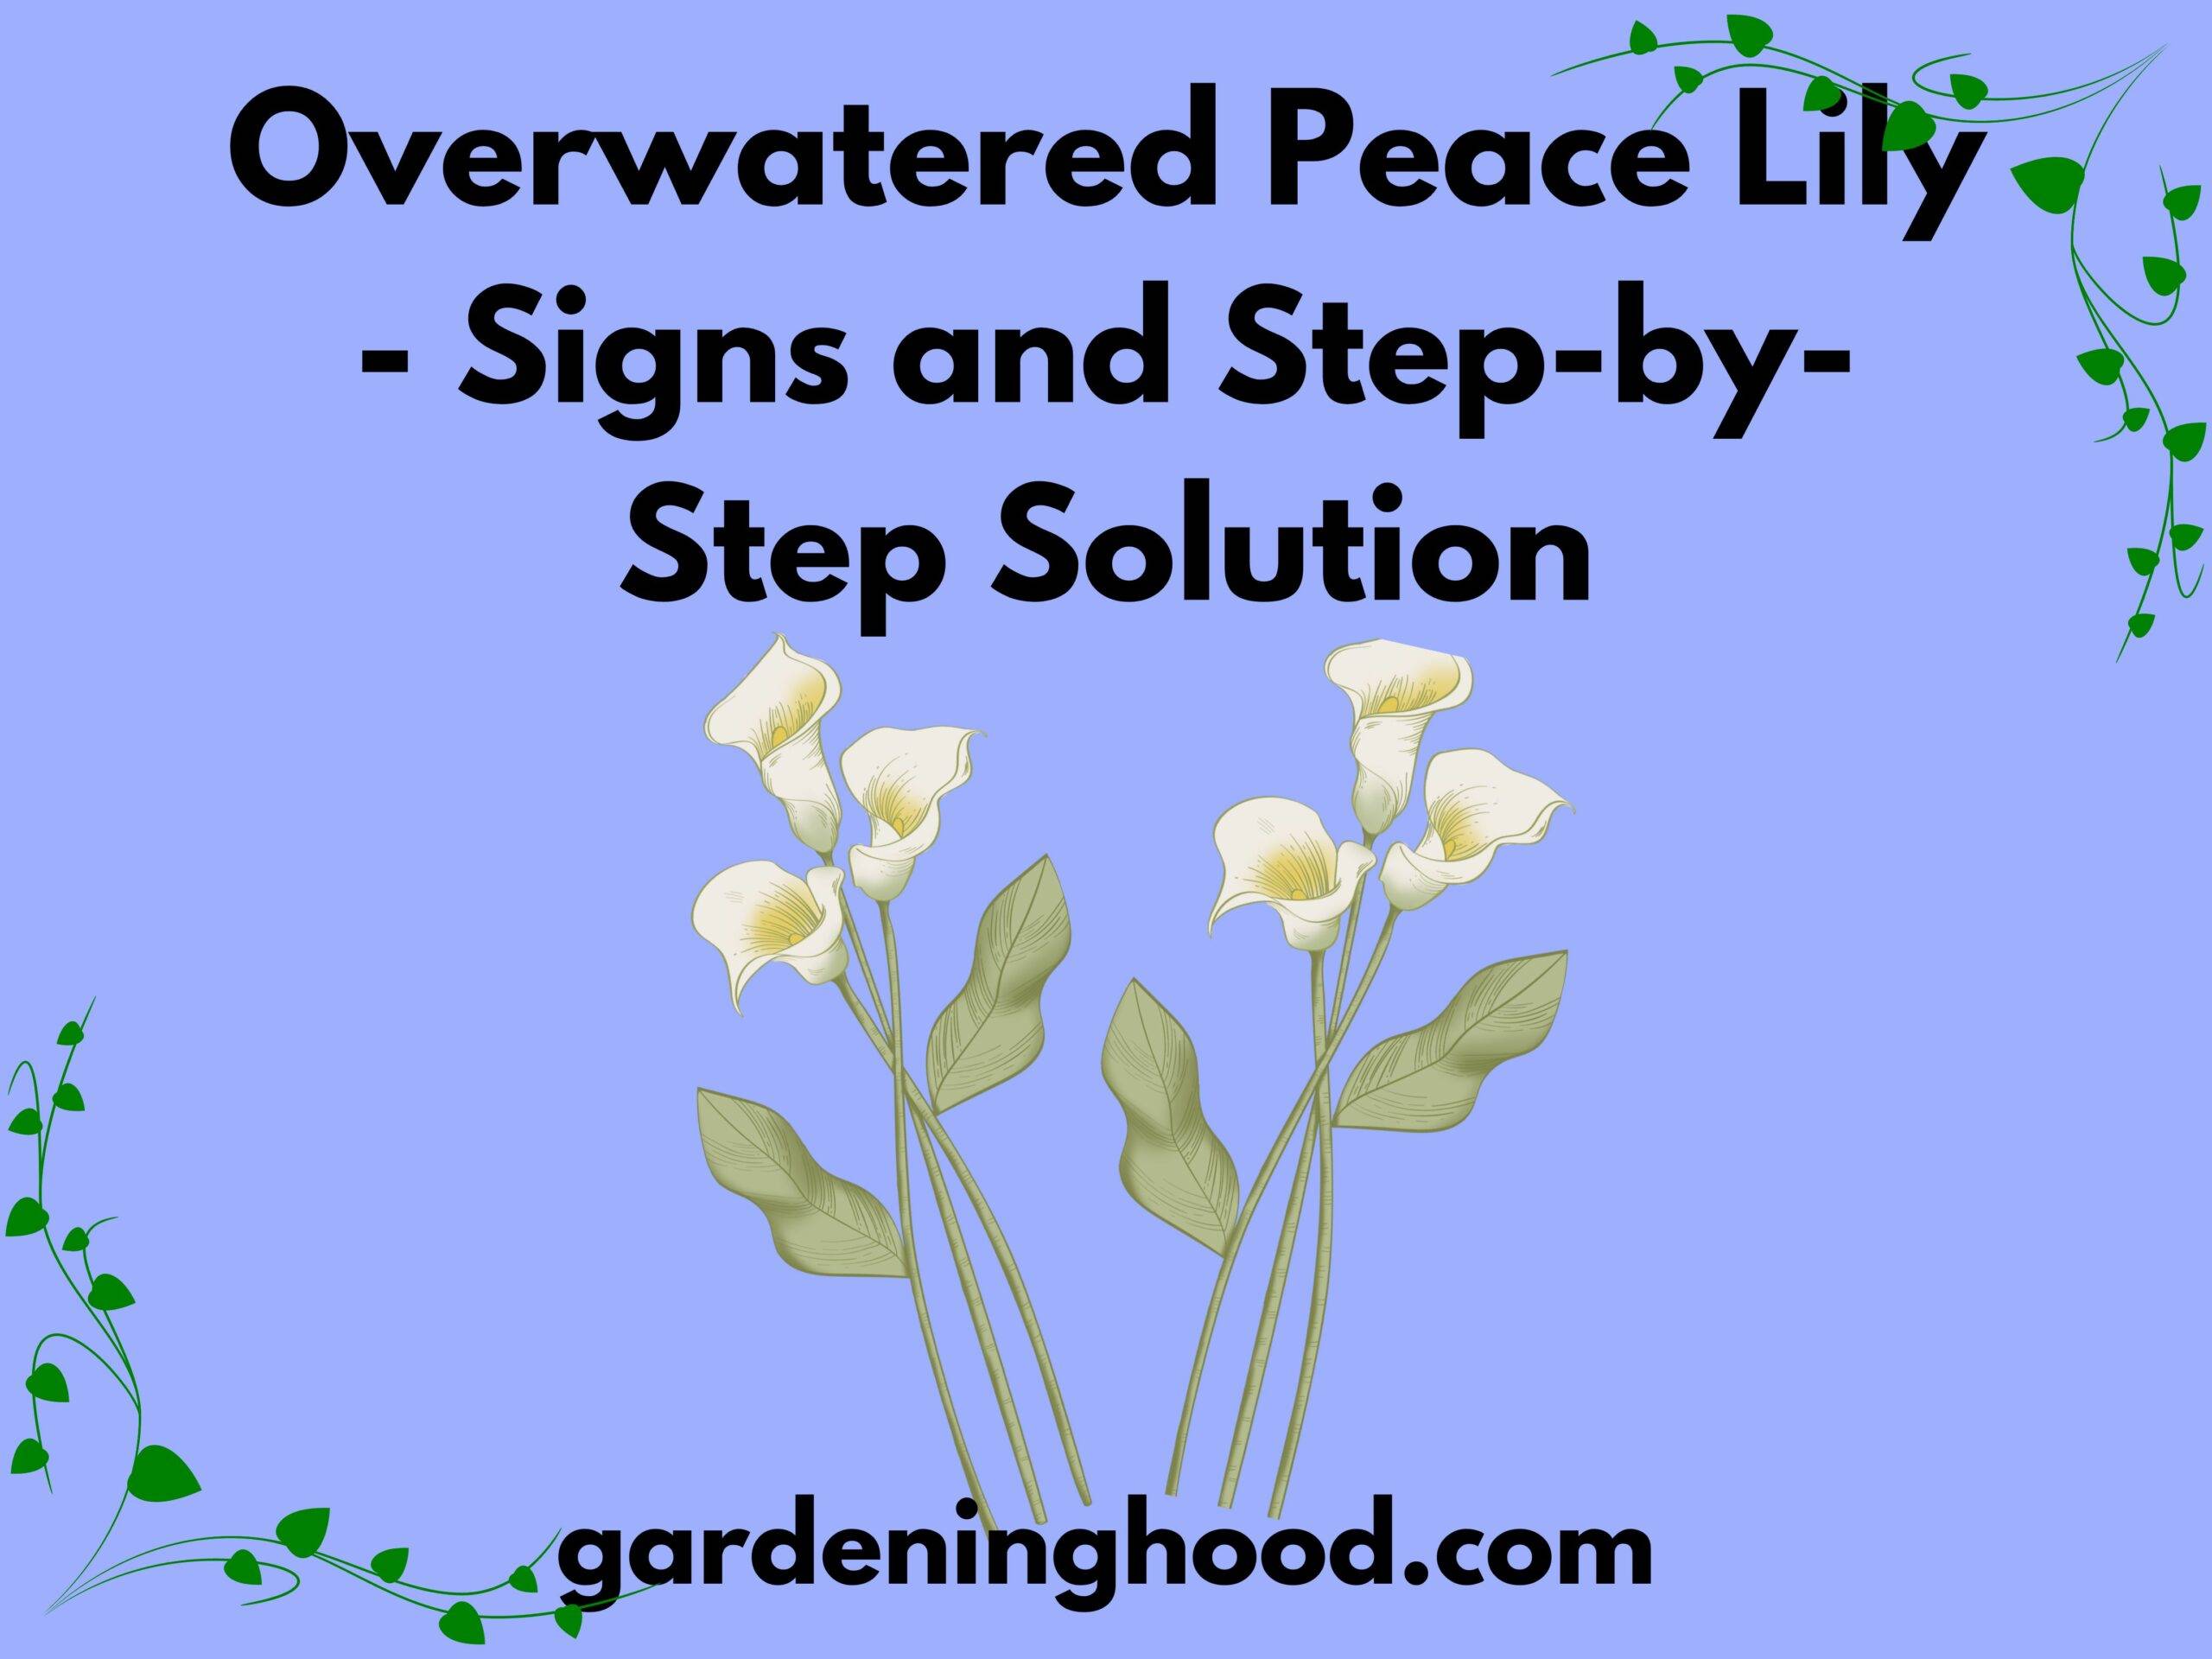 Overwatered Peace Lily - Signs and Step-by-Step Solution